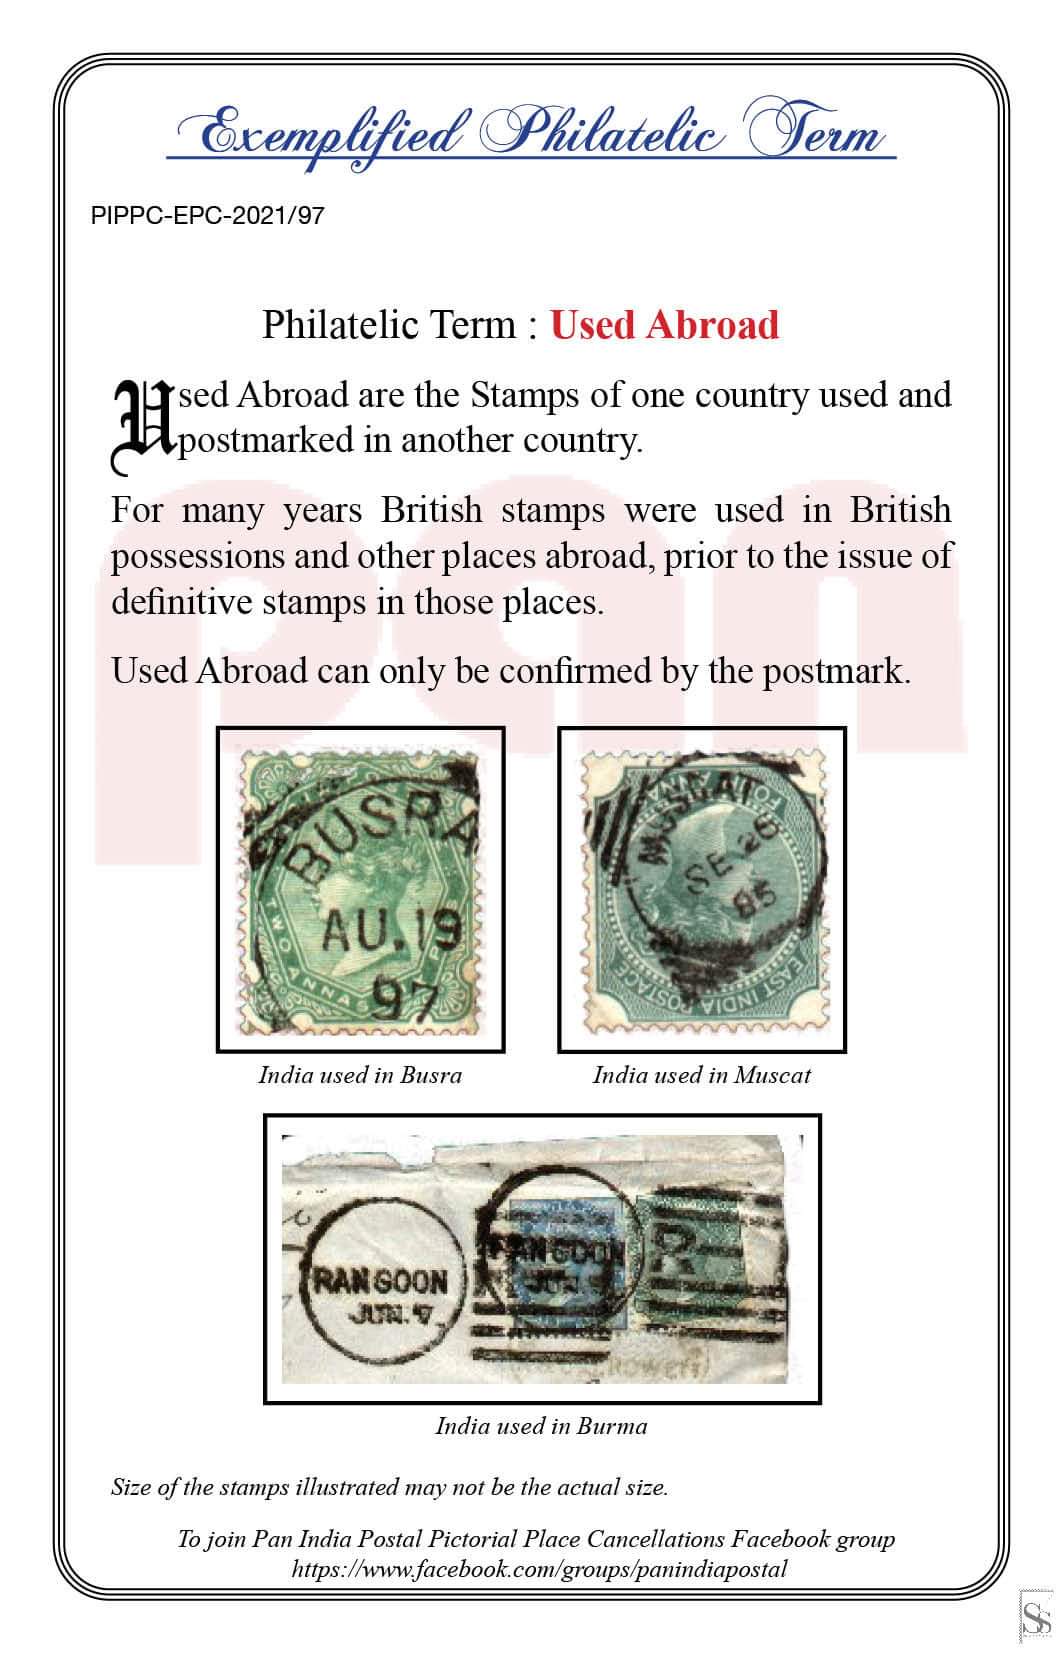 97. Today's Exemplified Philatelic term-Used Abroad